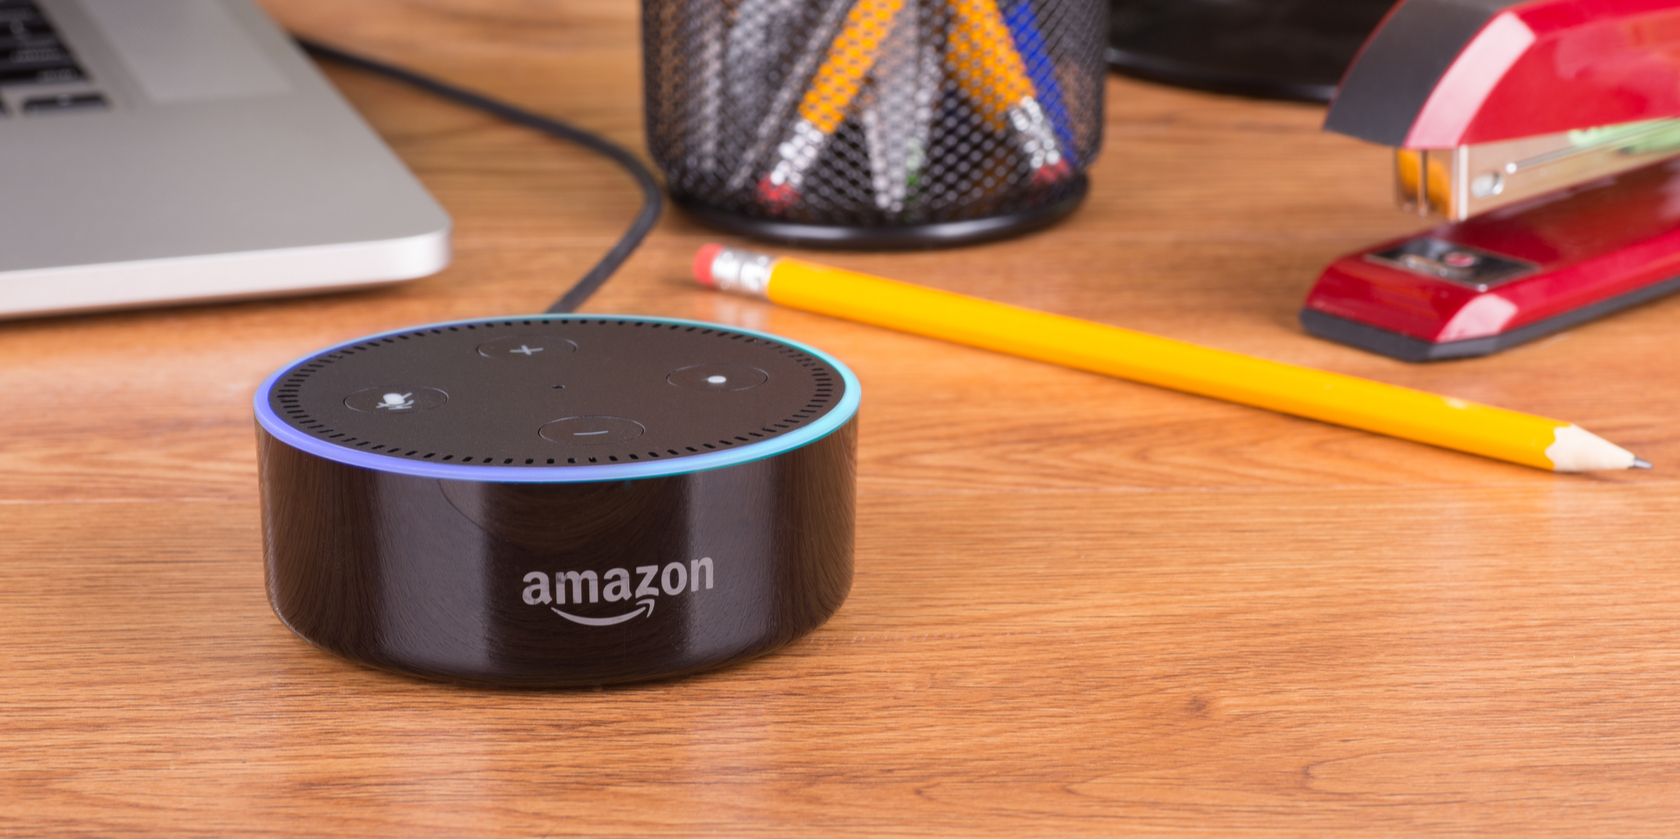 Alexa Won't Connect to Wi-Fi? A Troubleshooting Guide to Fix It